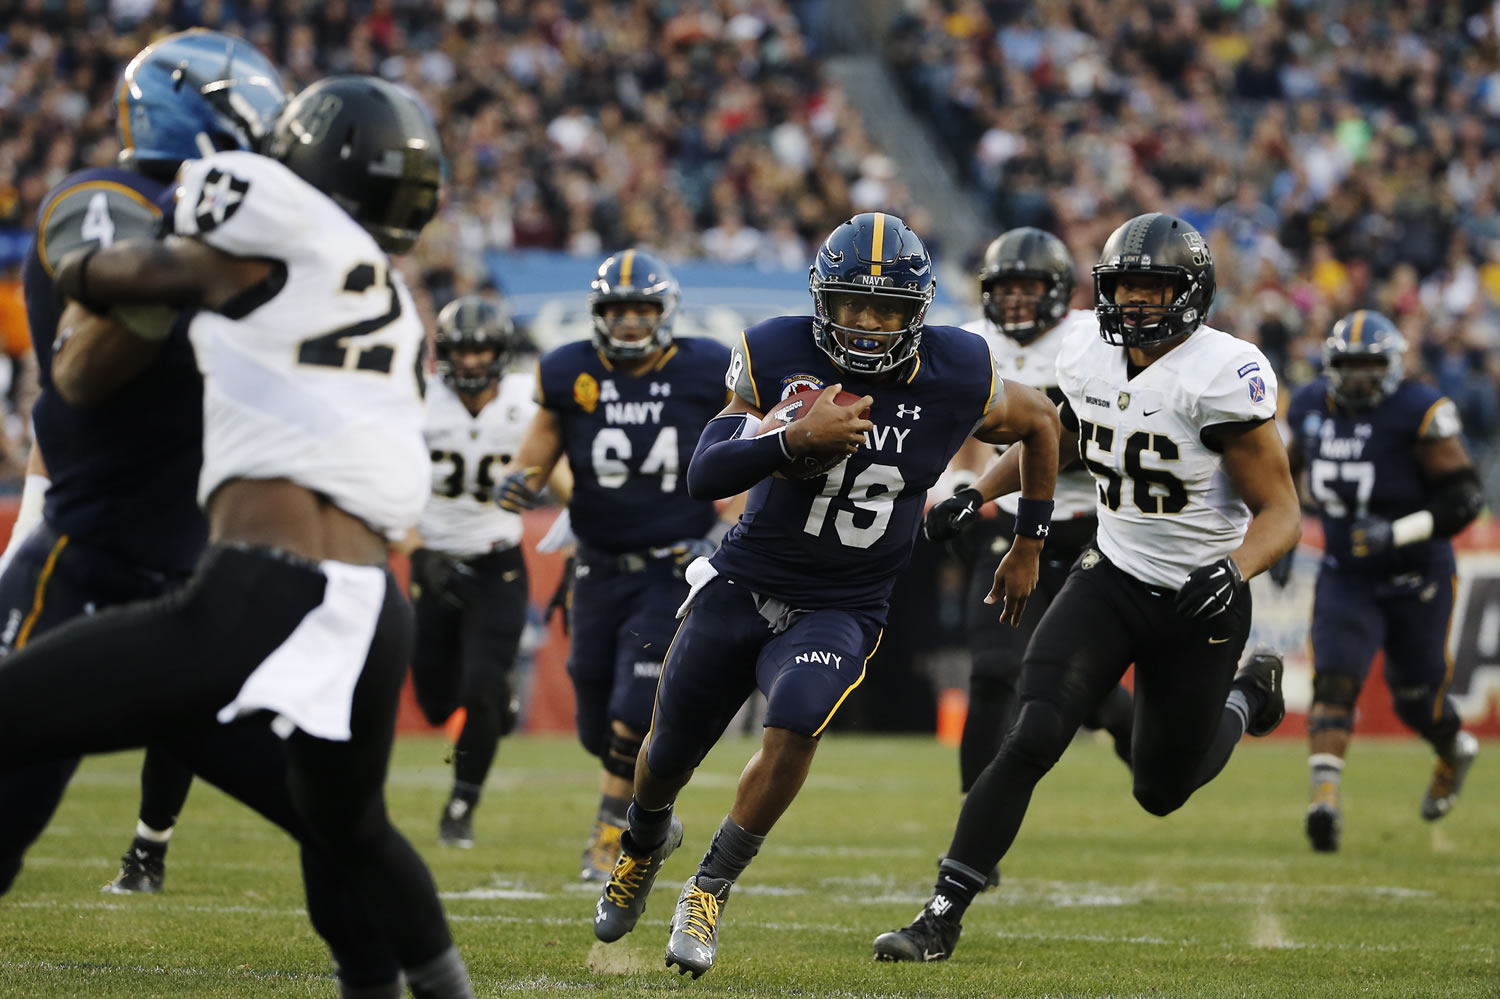 Navy quarterback Keenan Reynolds (19) rushes during an NCAA college football game against Army Saturday, Dec. 12, 2015, in Philadelphia.